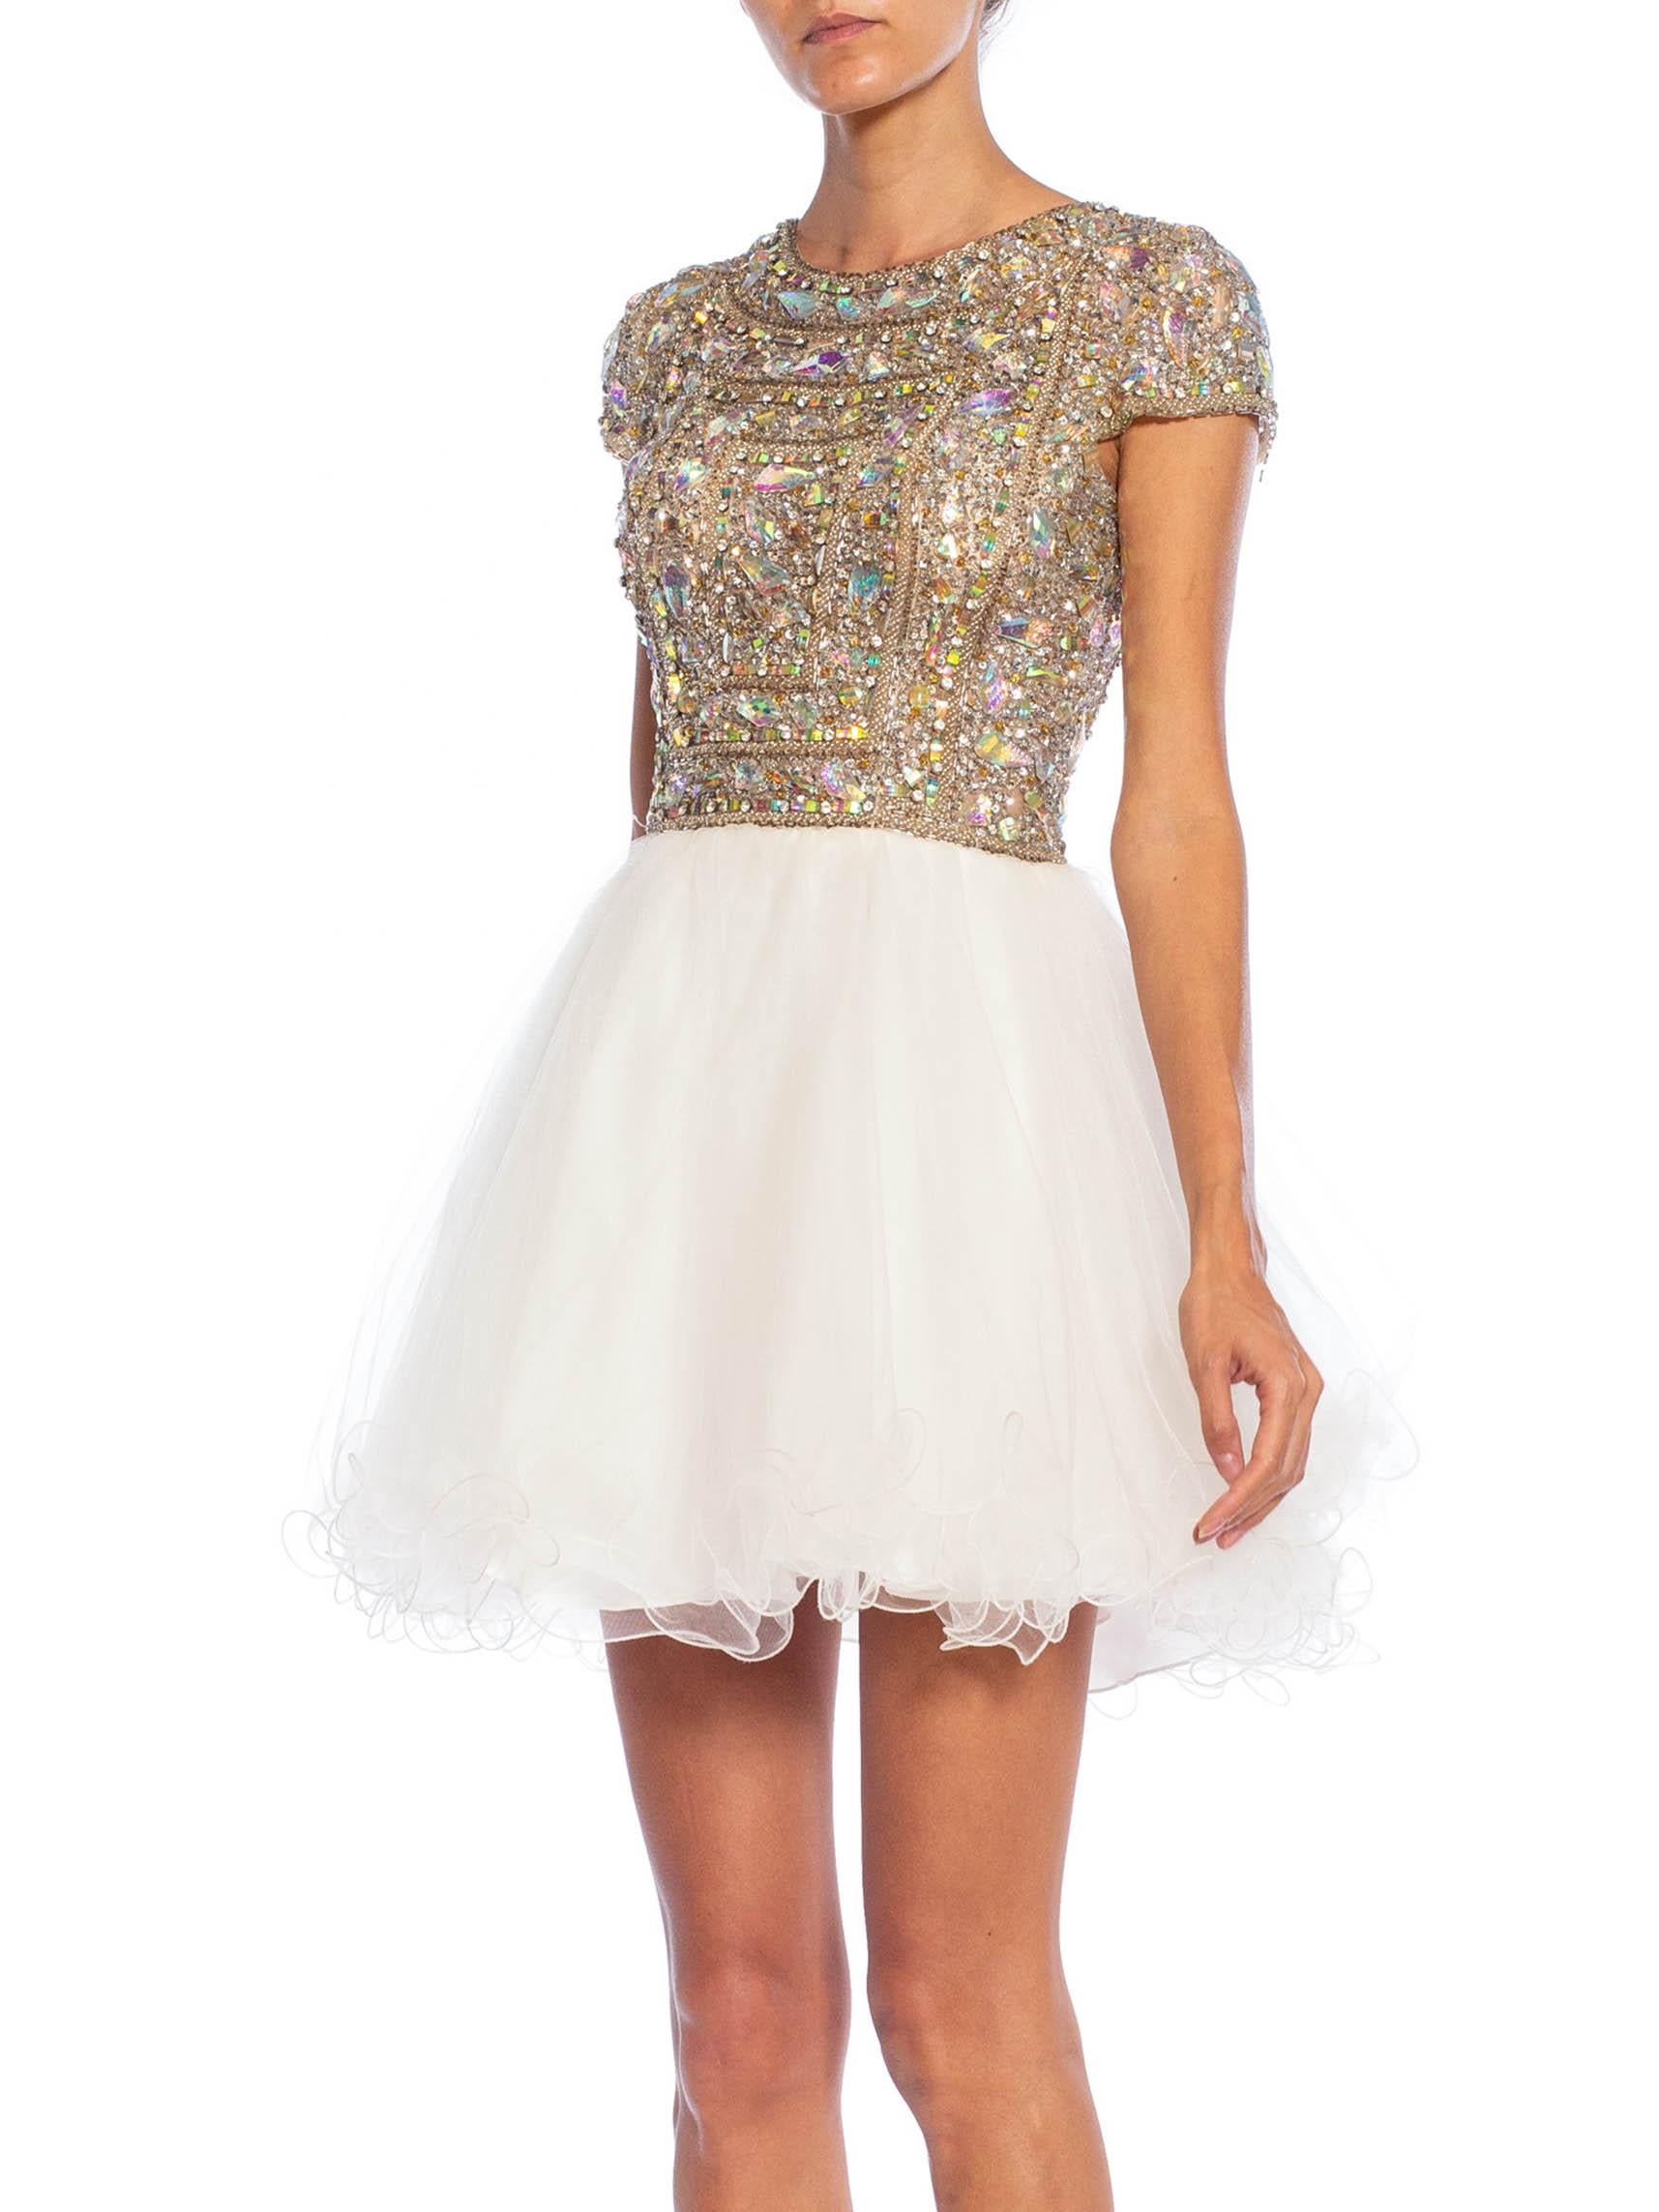 2010S Silver & White Beaded Tulle Cocktail Dress For Sale 3